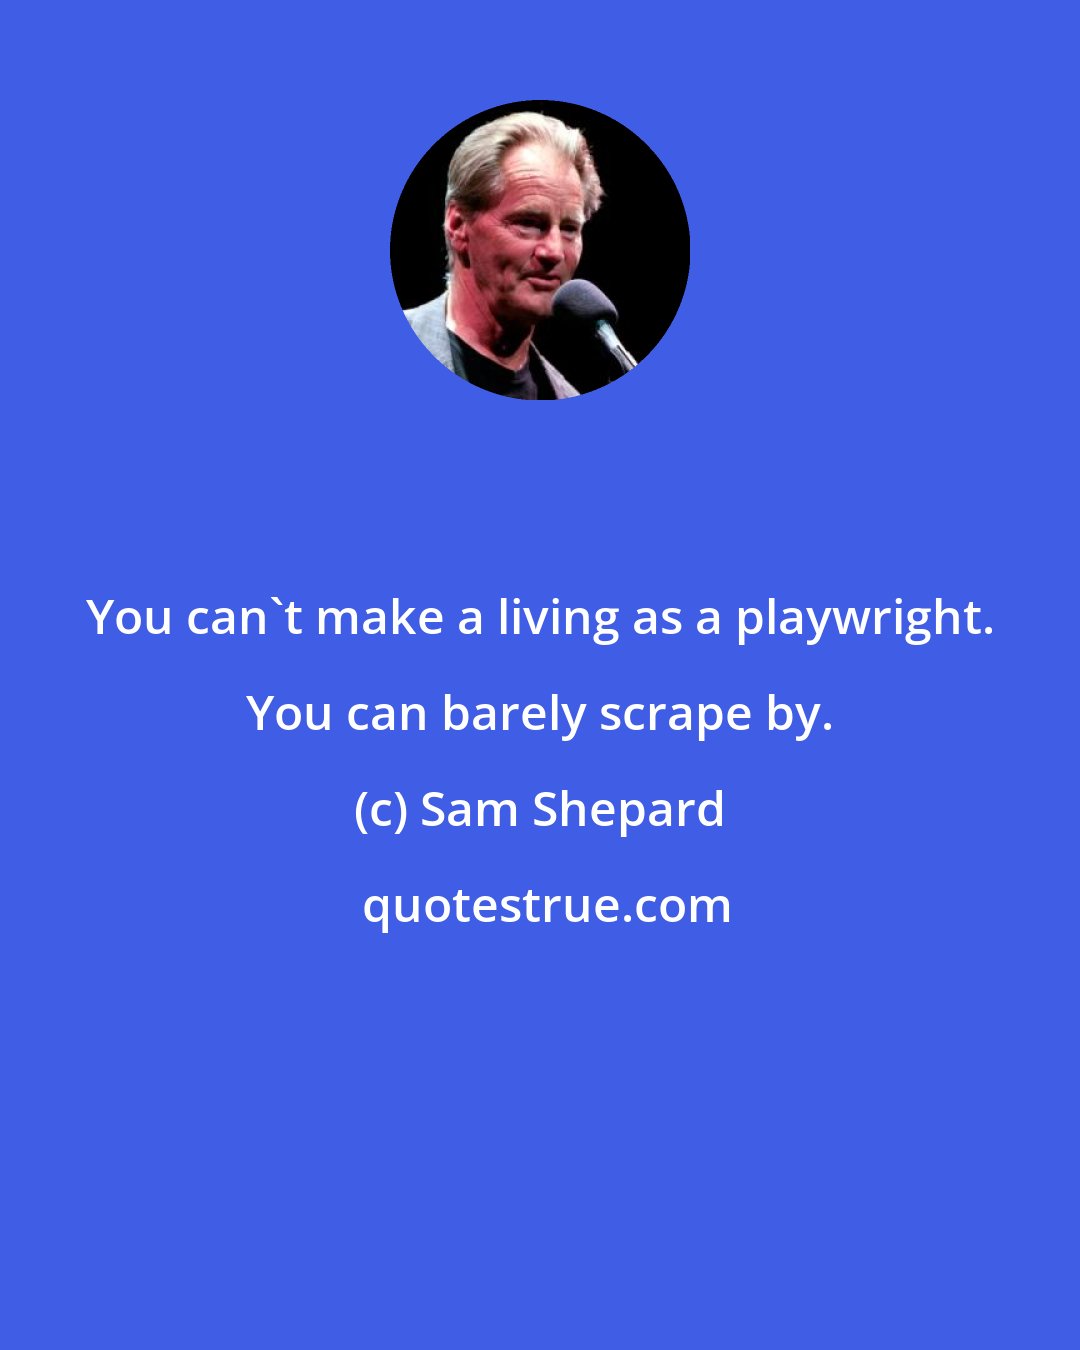 Sam Shepard: You can't make a living as a playwright. You can barely scrape by.